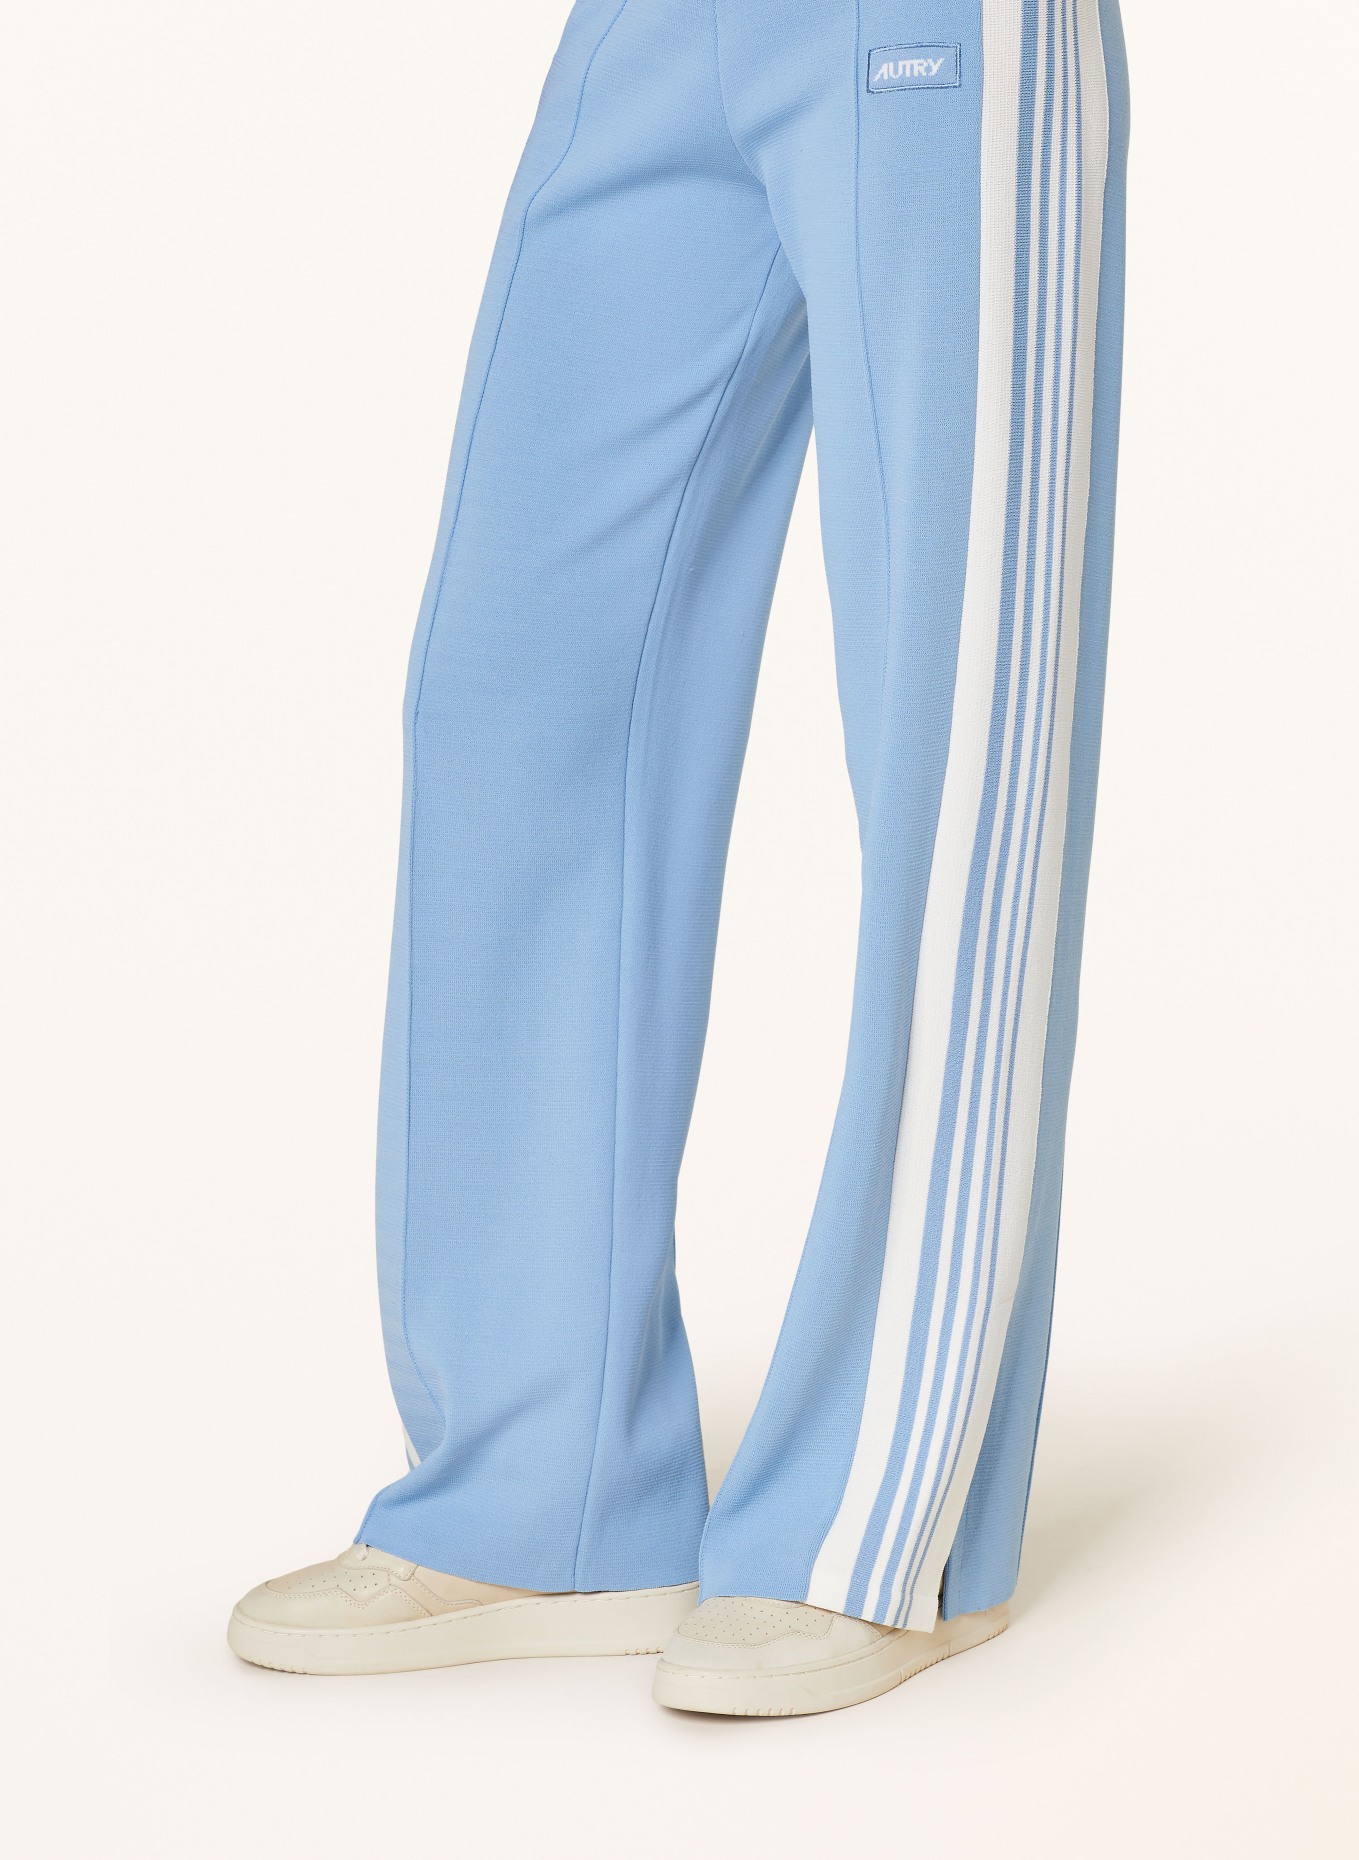 AUTRY Trousers with tuxedo stripes, Color: LIGHT BLUE/ WHITE (Image 5)